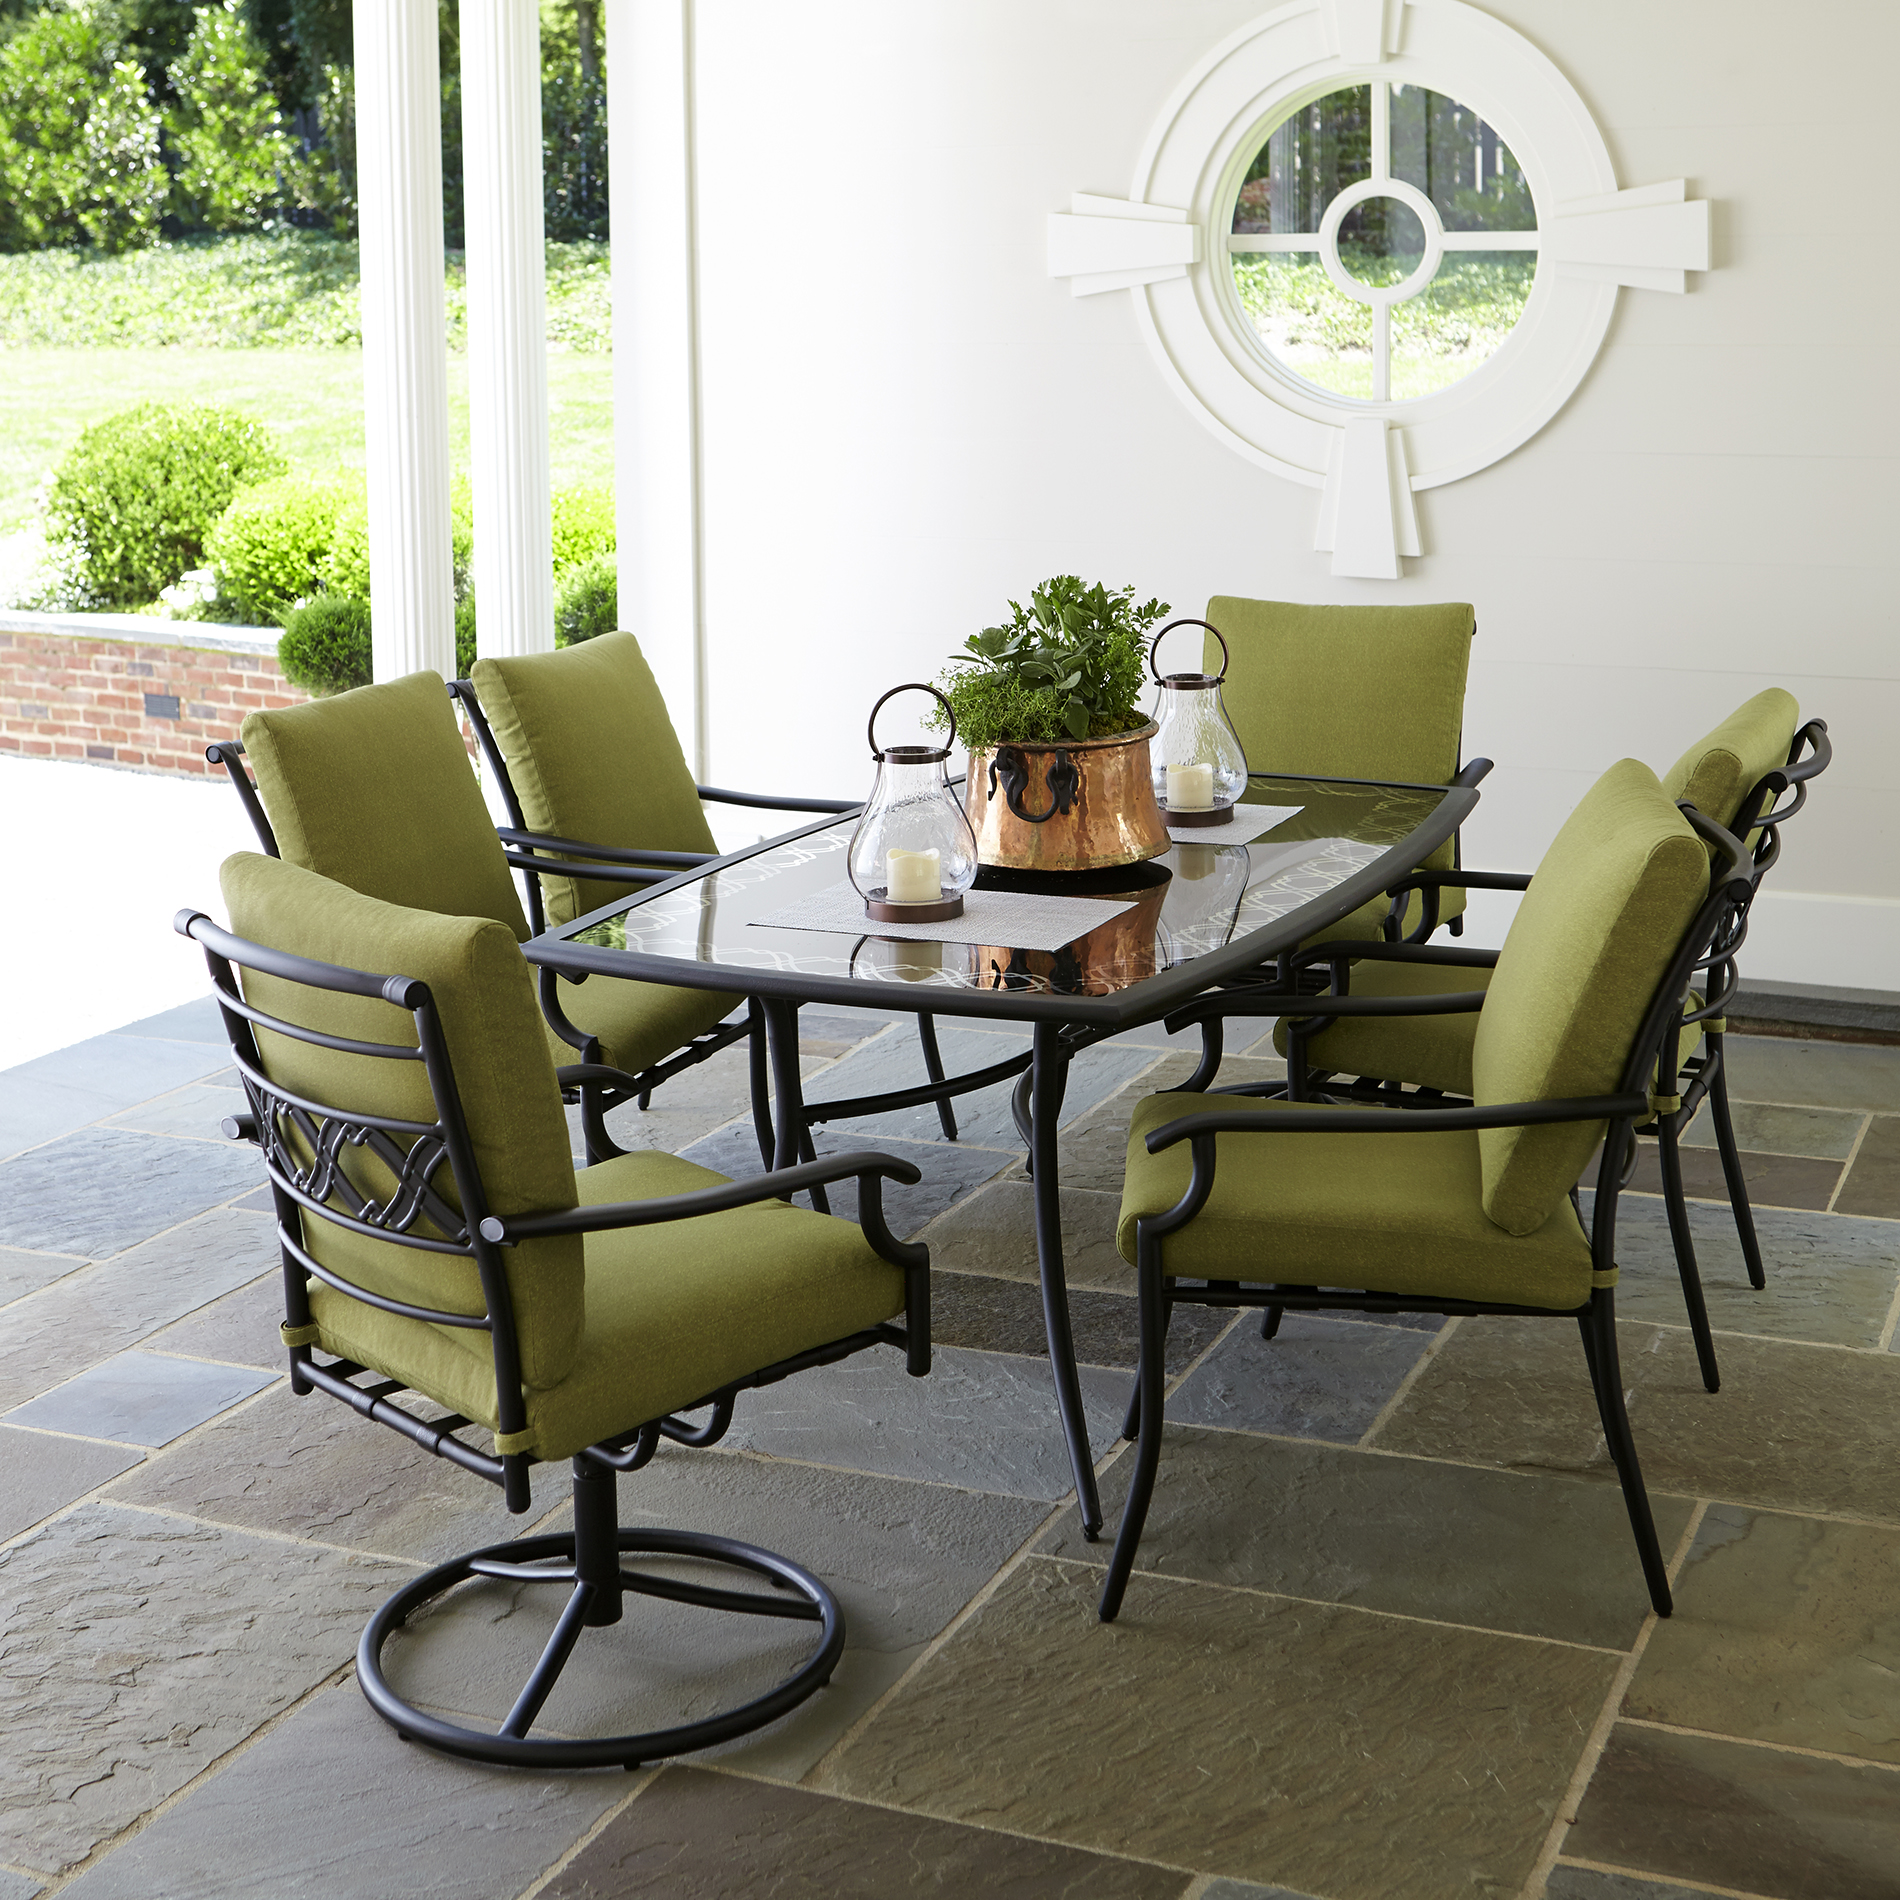 Garden Oasis Rockford 7pc Dining Set Green, Sears Outdoor Patio Chairs